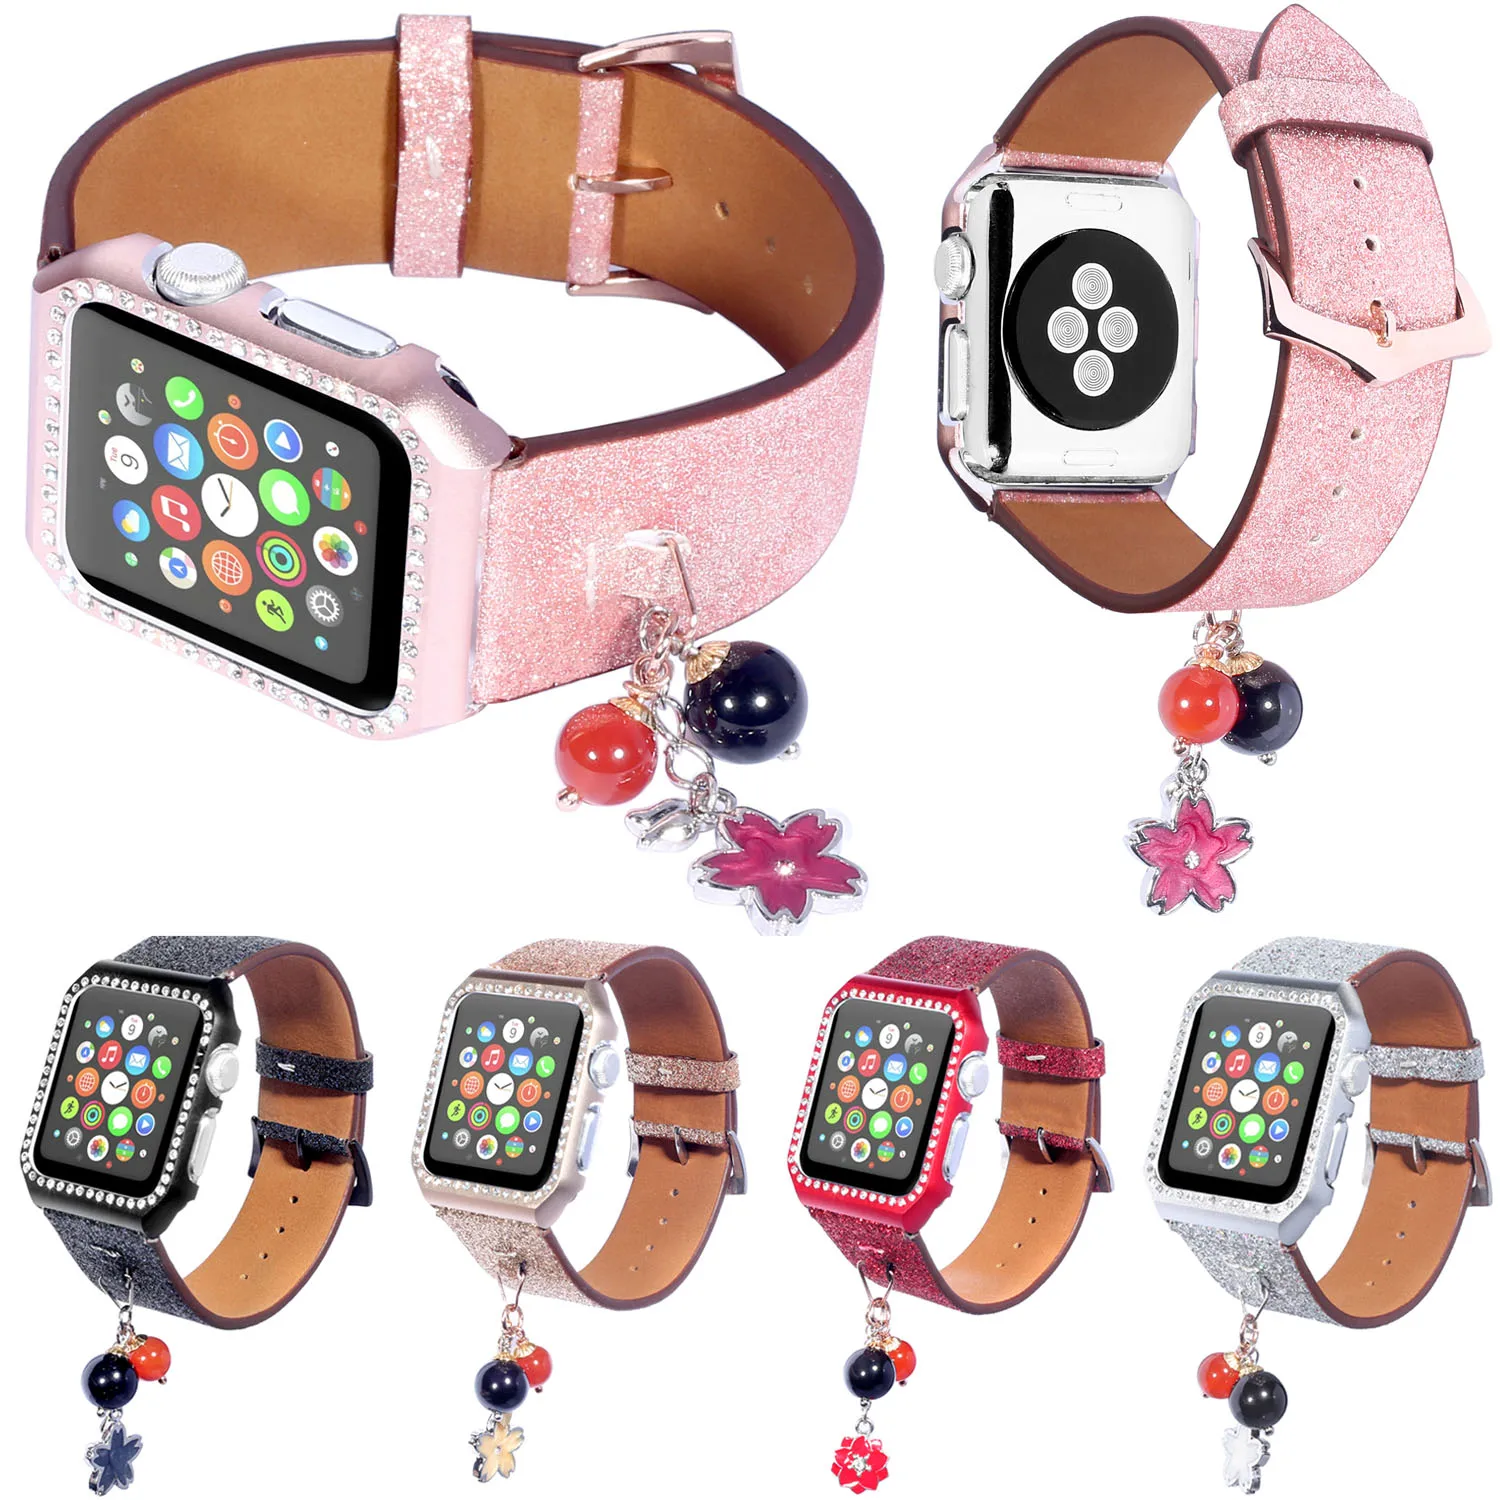 Bling Glitter Leather Watch Band for Apple Watch Series 1/2/3 Strap Belt Bracelet 42mm 38mm Diamond Cover for Apple Watch Case